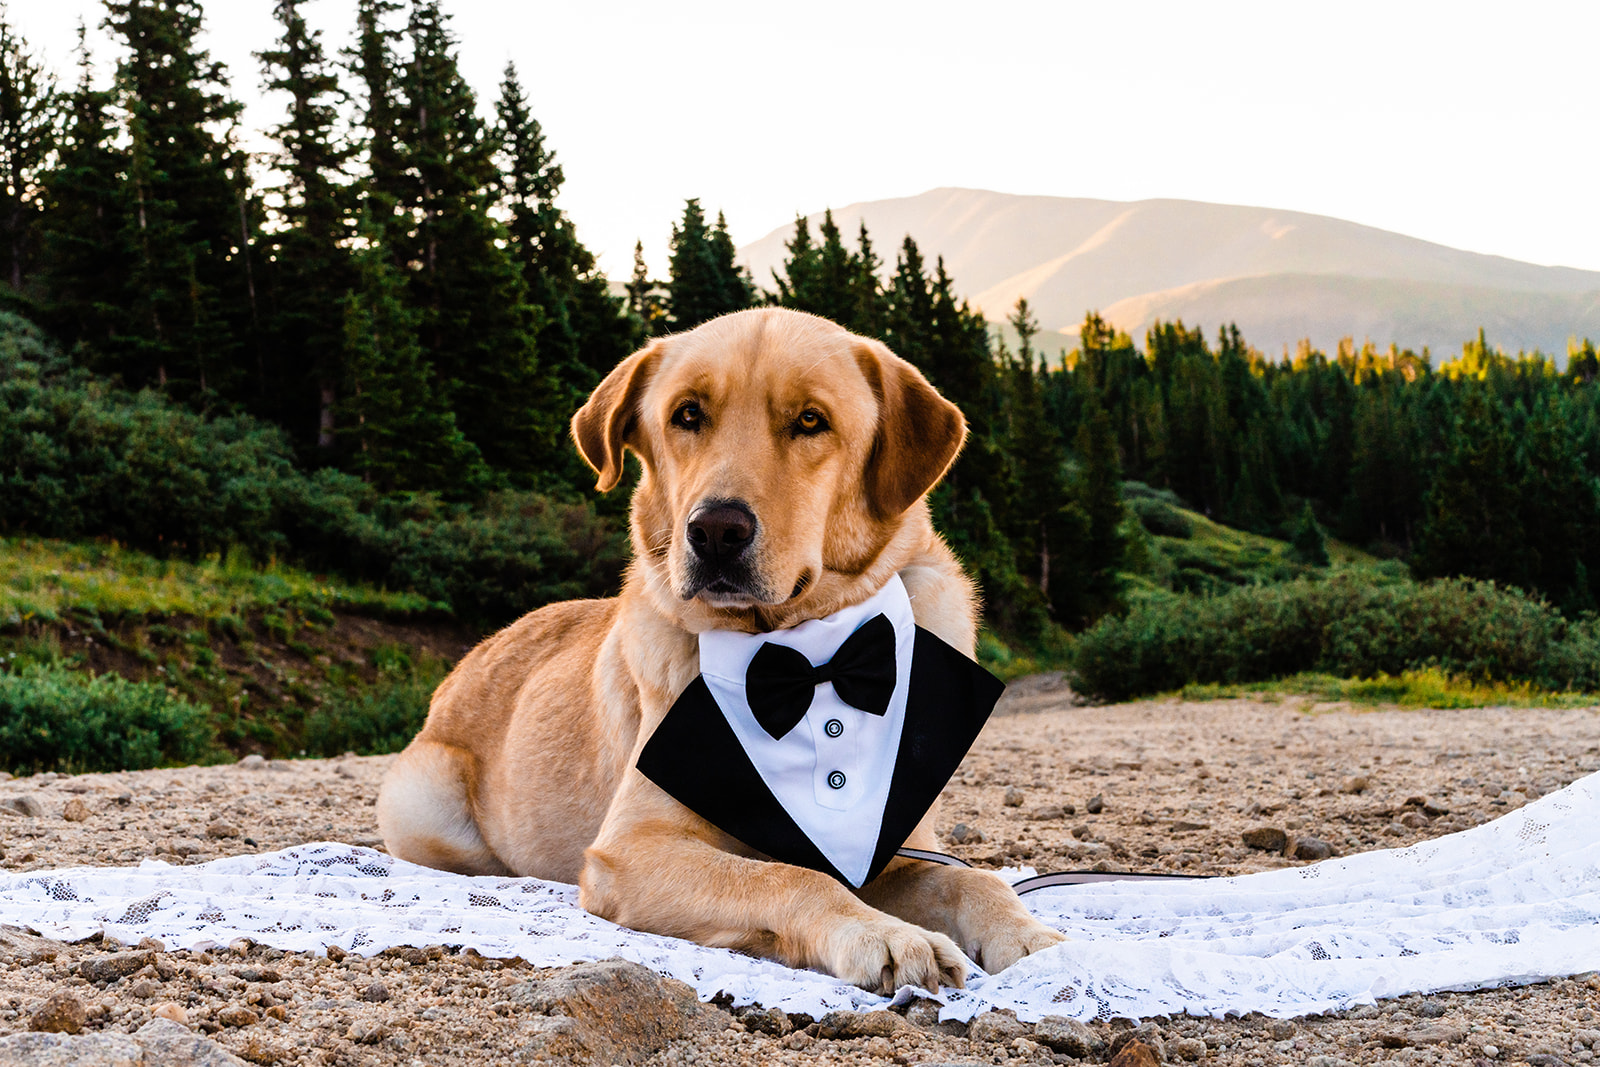 Golden retriever wearing a tuxedo bib lying on his Mom's white dress with a forest and mountains in the background at sunrise demonstrating how to elope in Breckenridge, Colorado.